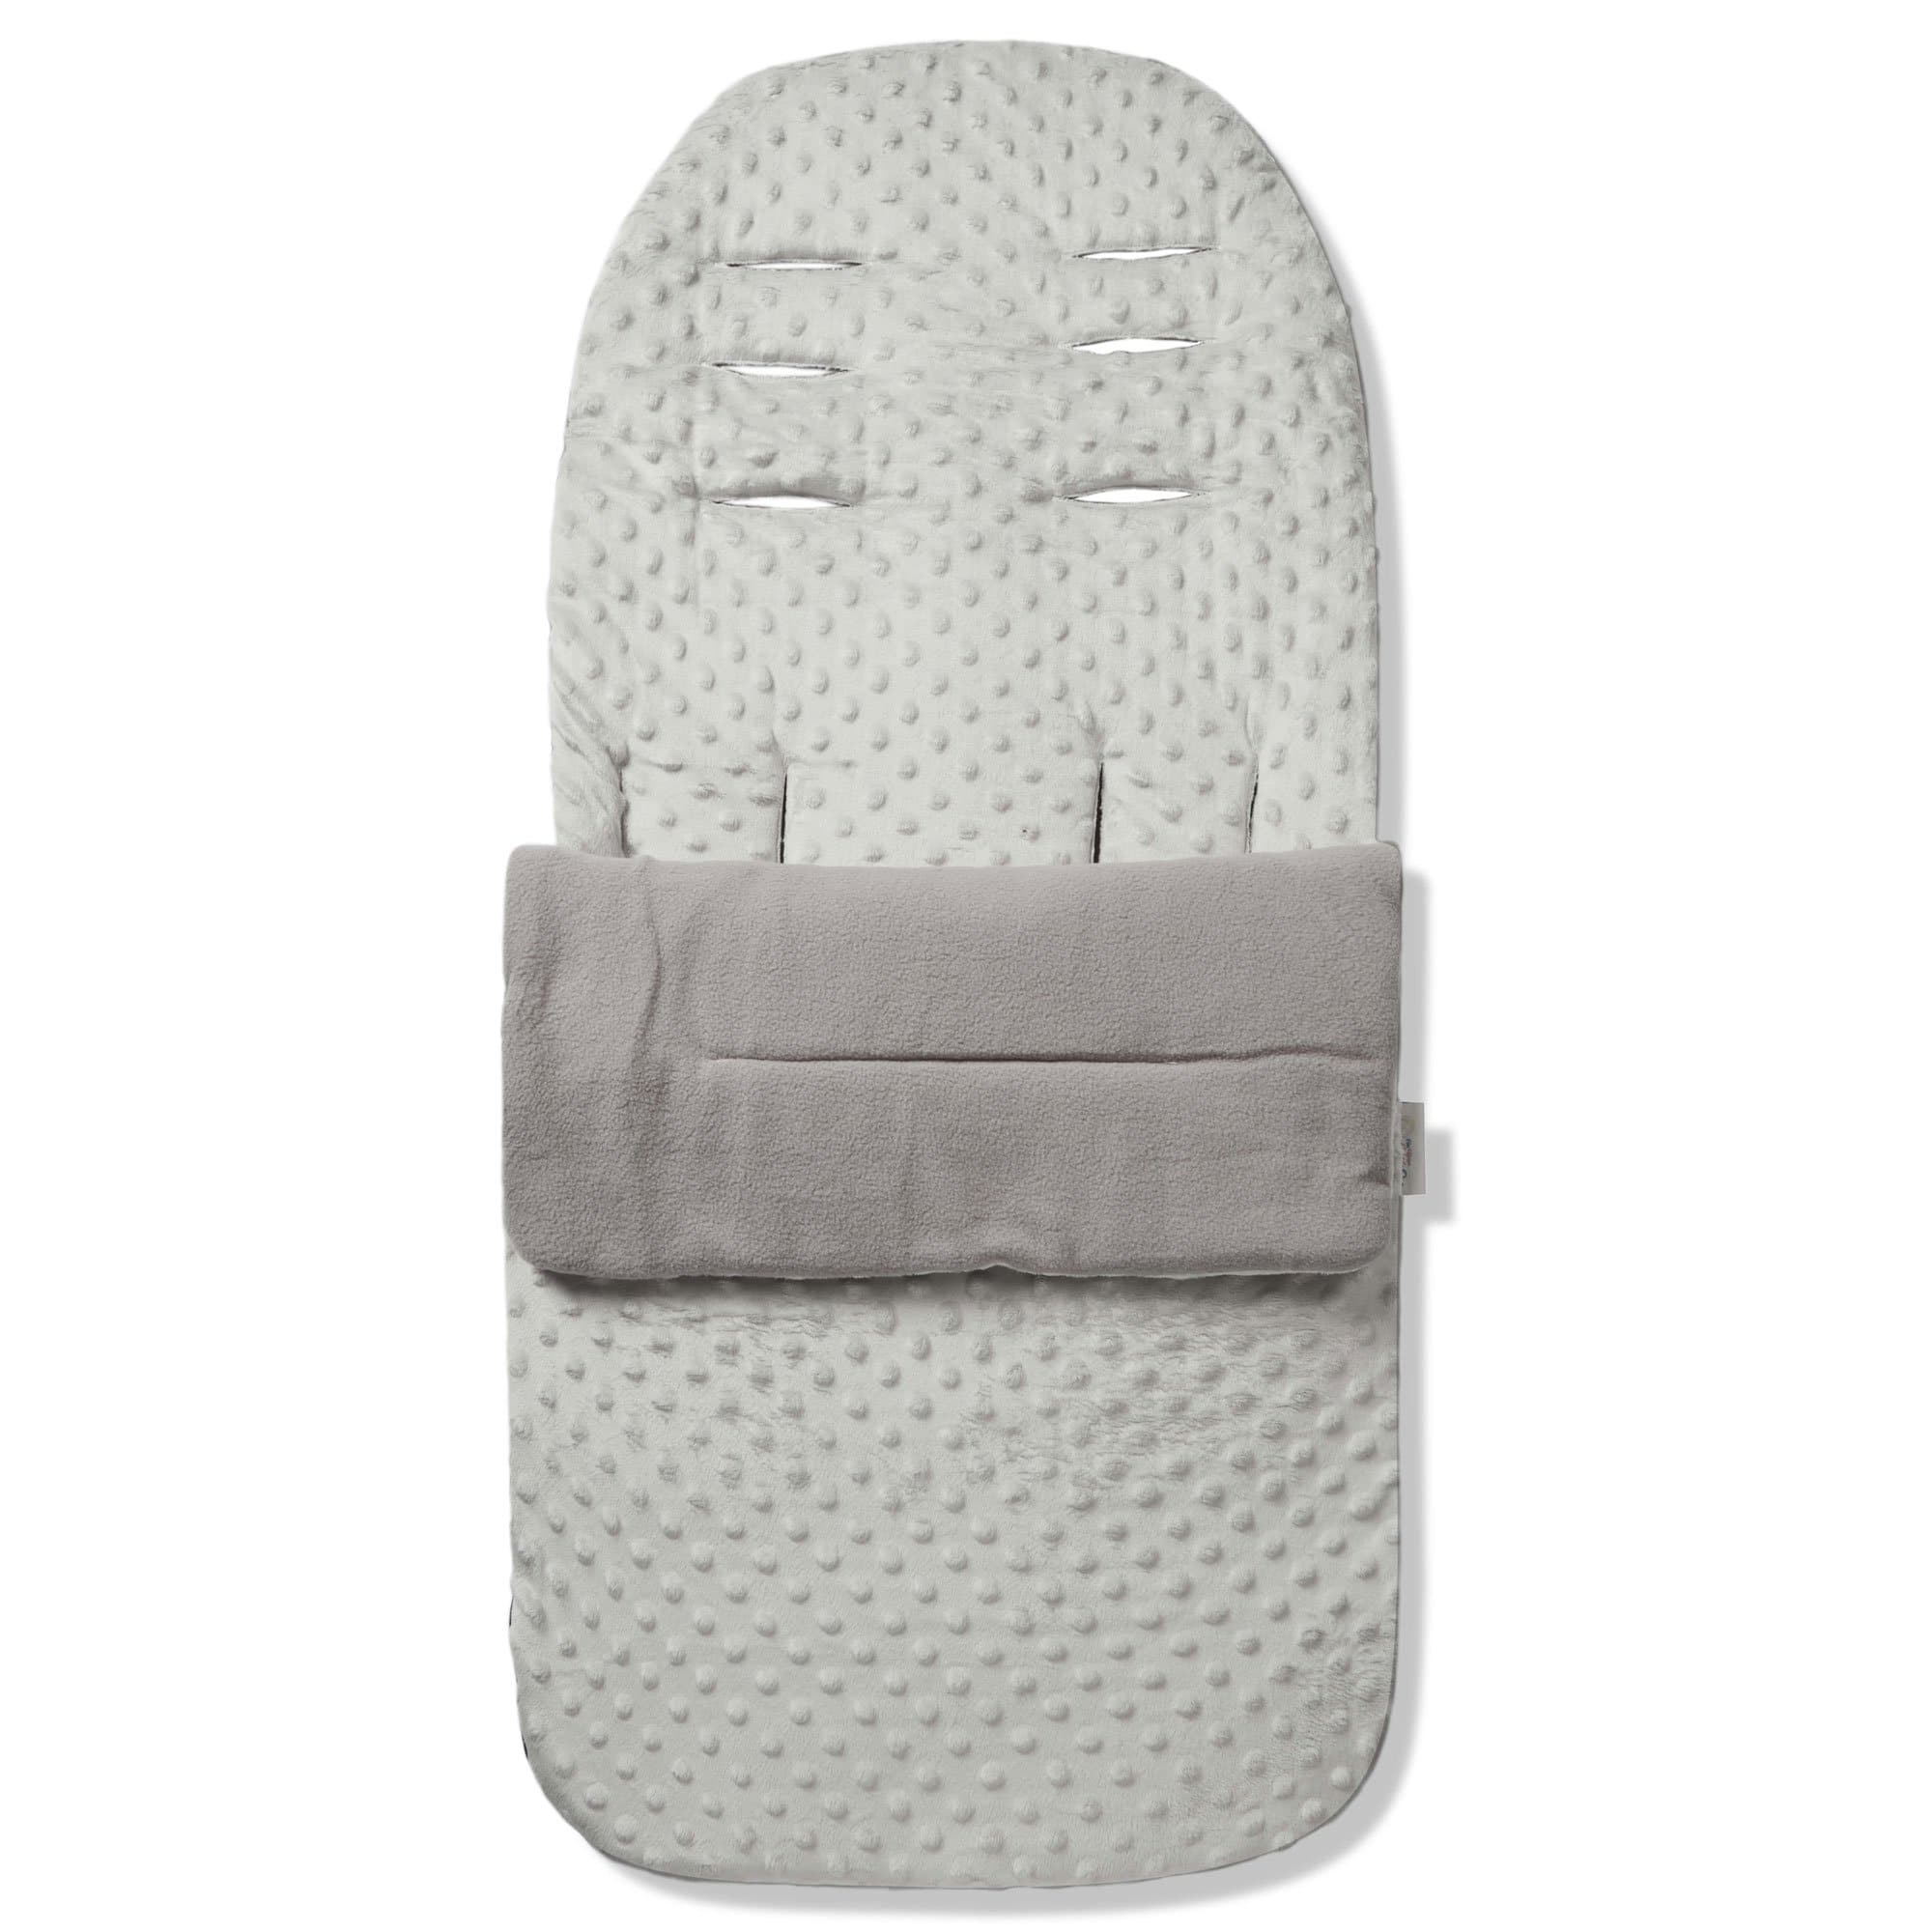 Dimple Footmuff / Cosy Toes Compatible with NeoNato - Grey / Fits All Models | For Your Little One